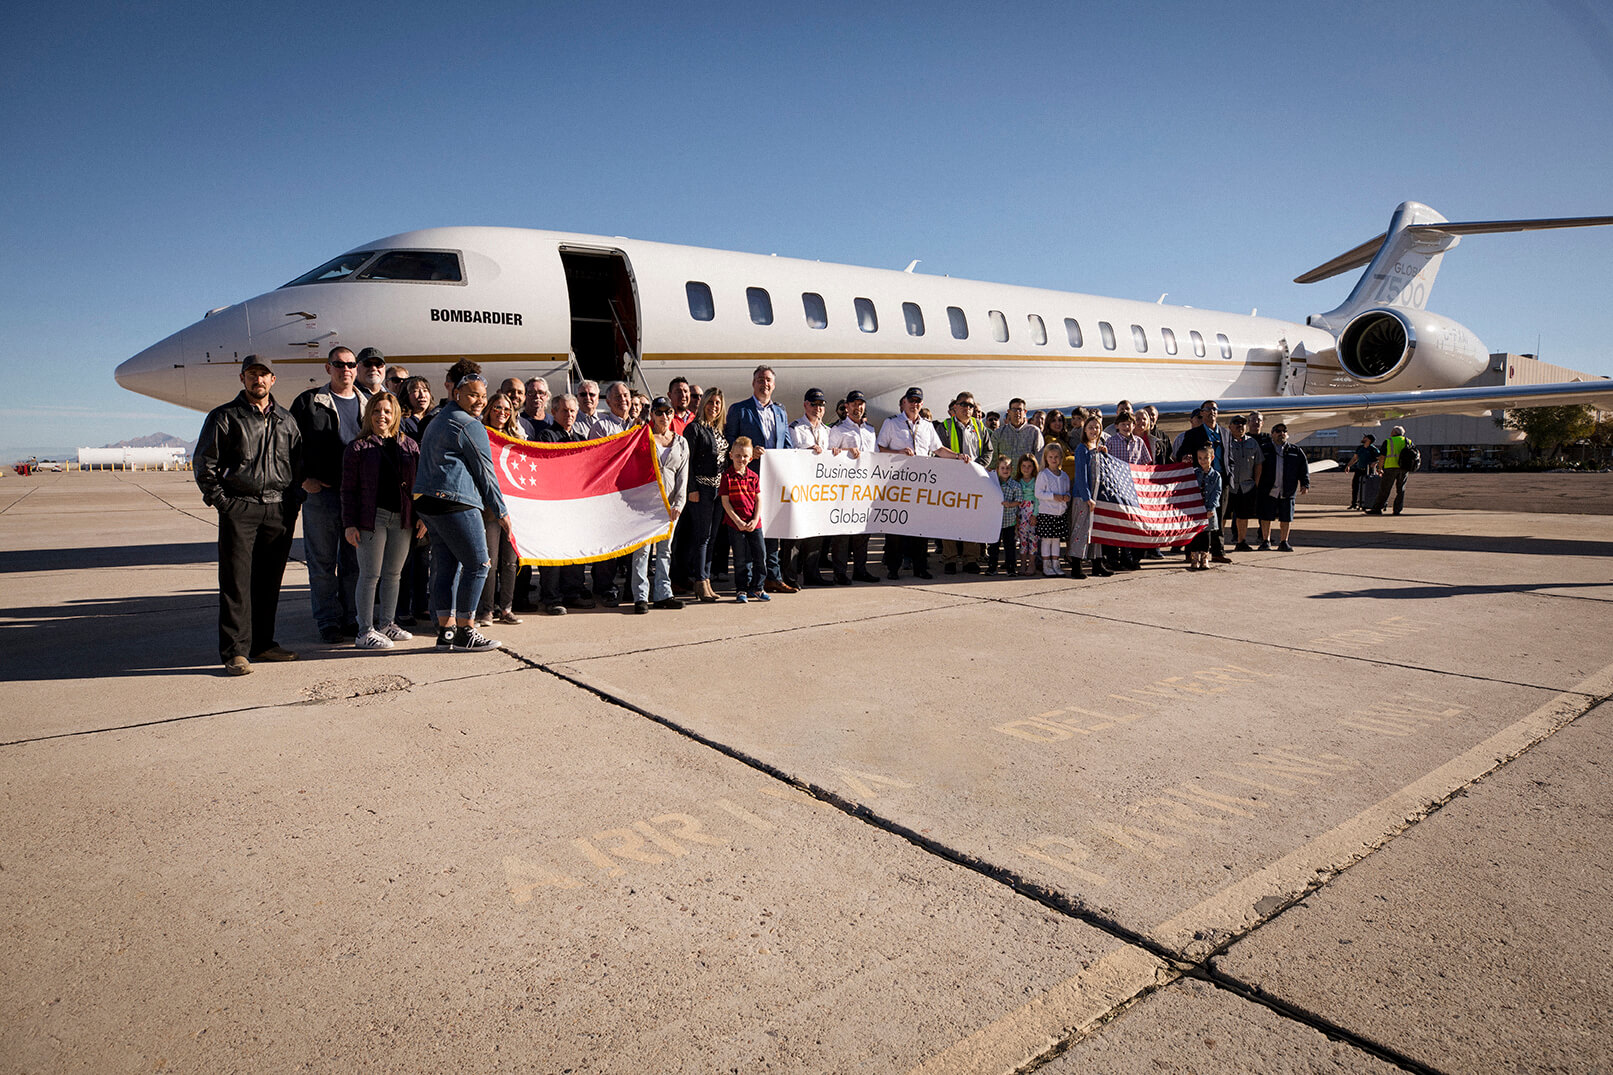 Bombardier Global 7500 aircraft completes the world’s longest range business jet flight in history